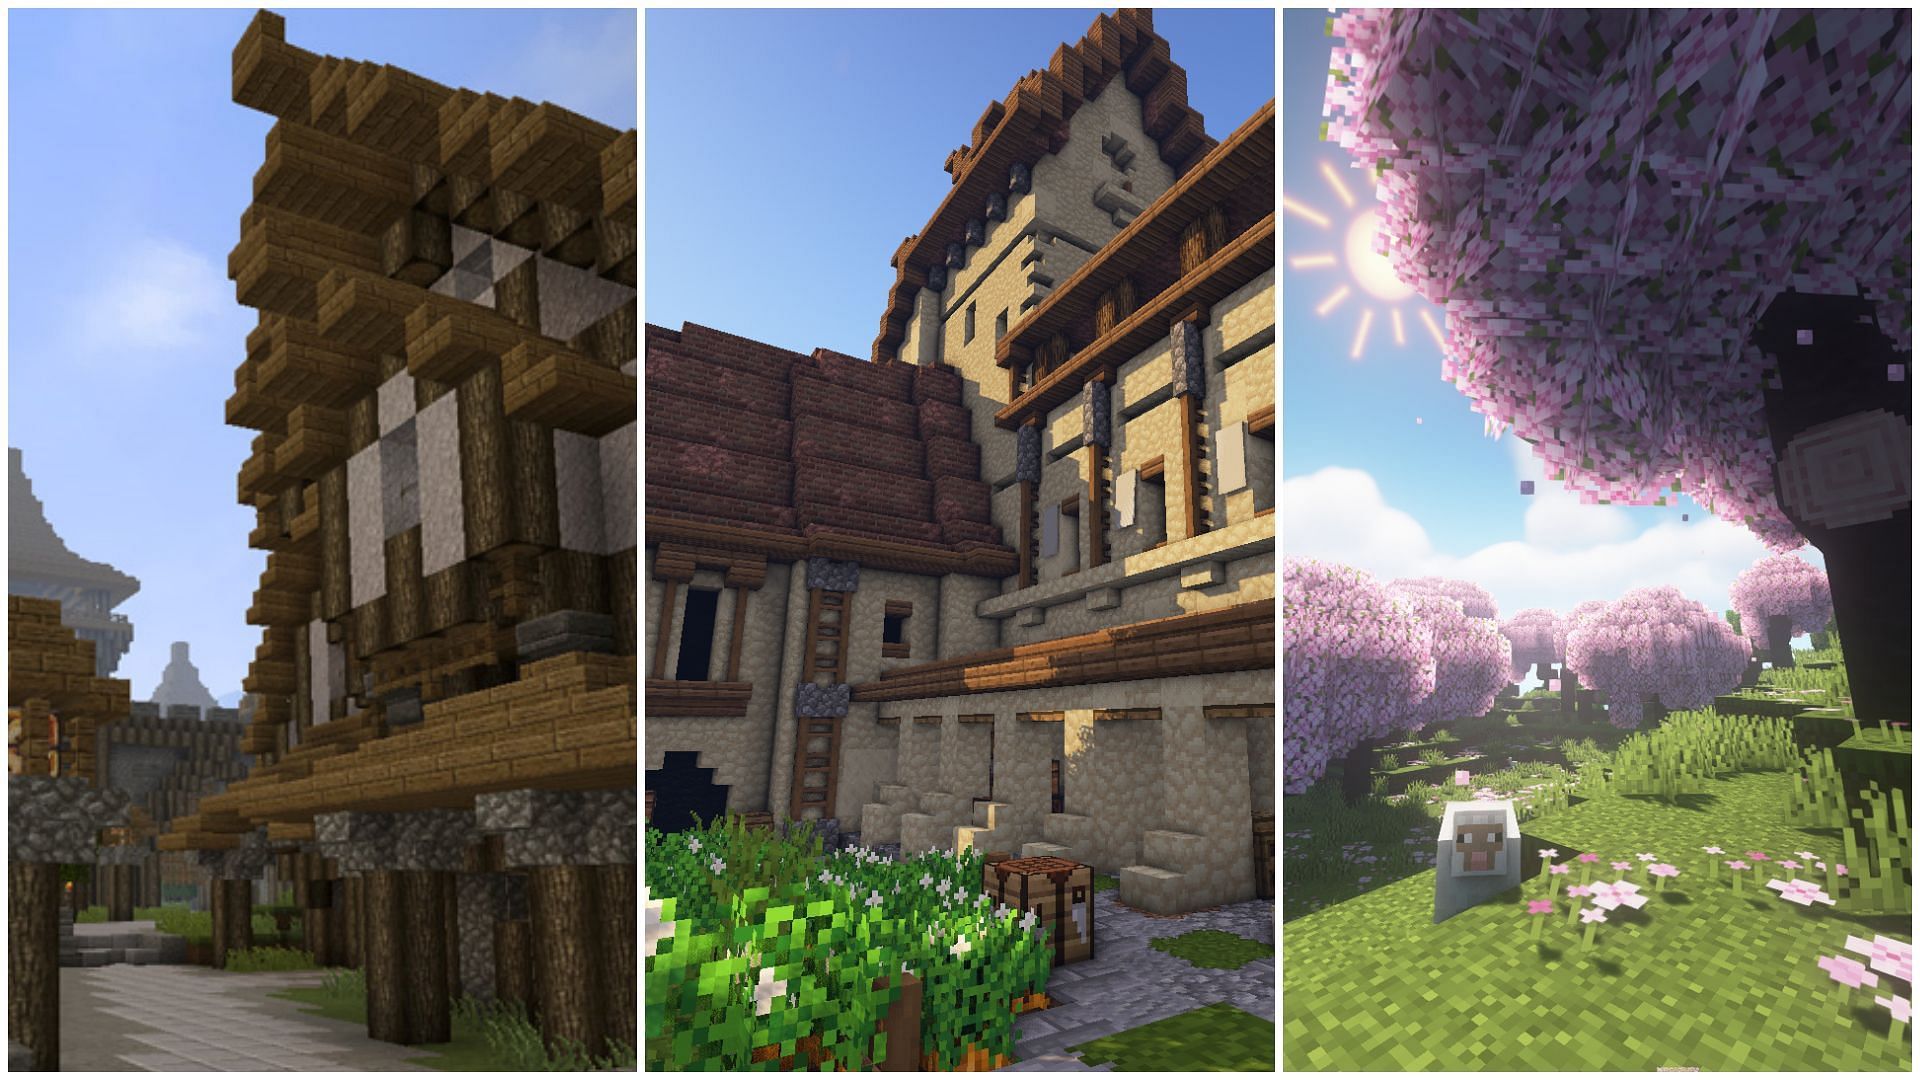 There are loads of texture packs that improve a structure